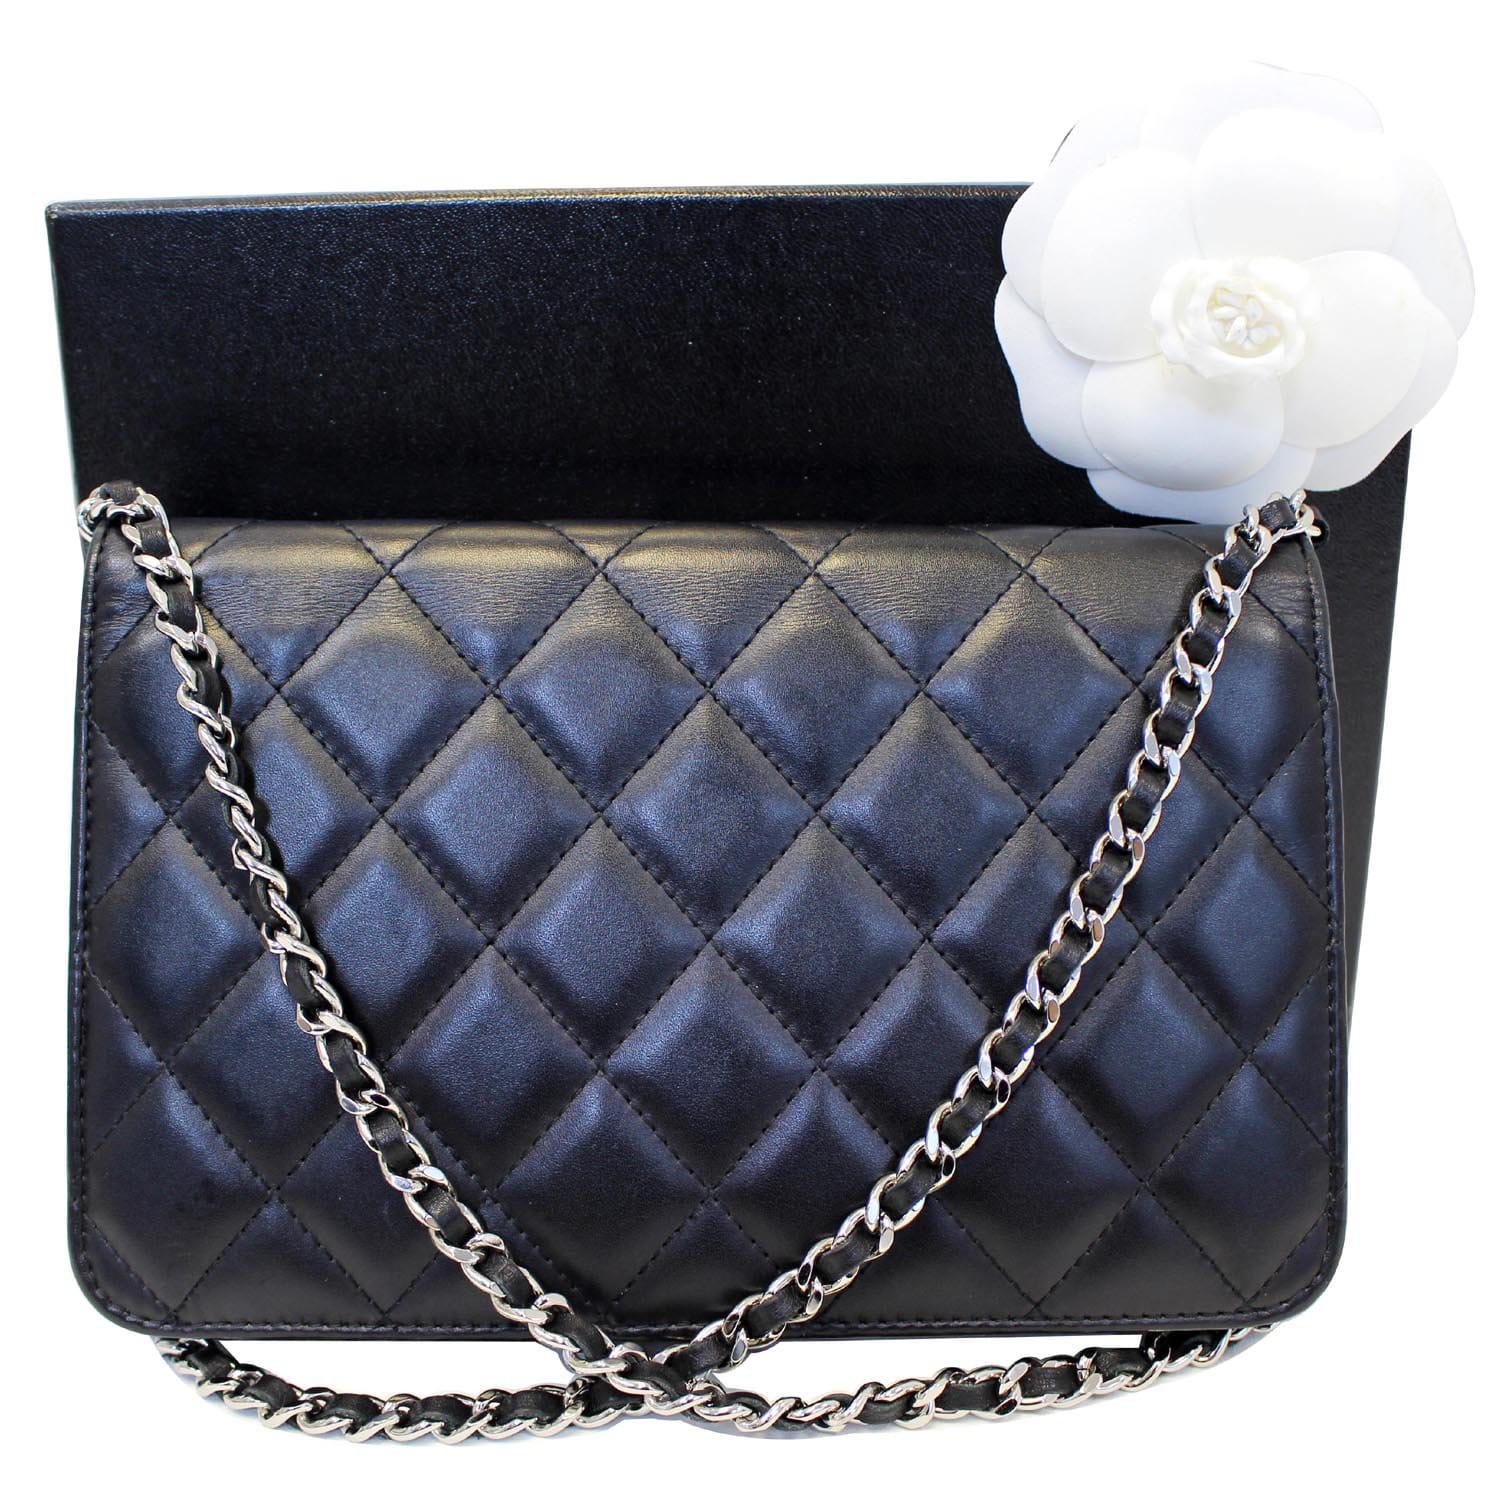 Chanel Navy Blue Quilted Lambskin Leather Classic WOC Clutch Bag